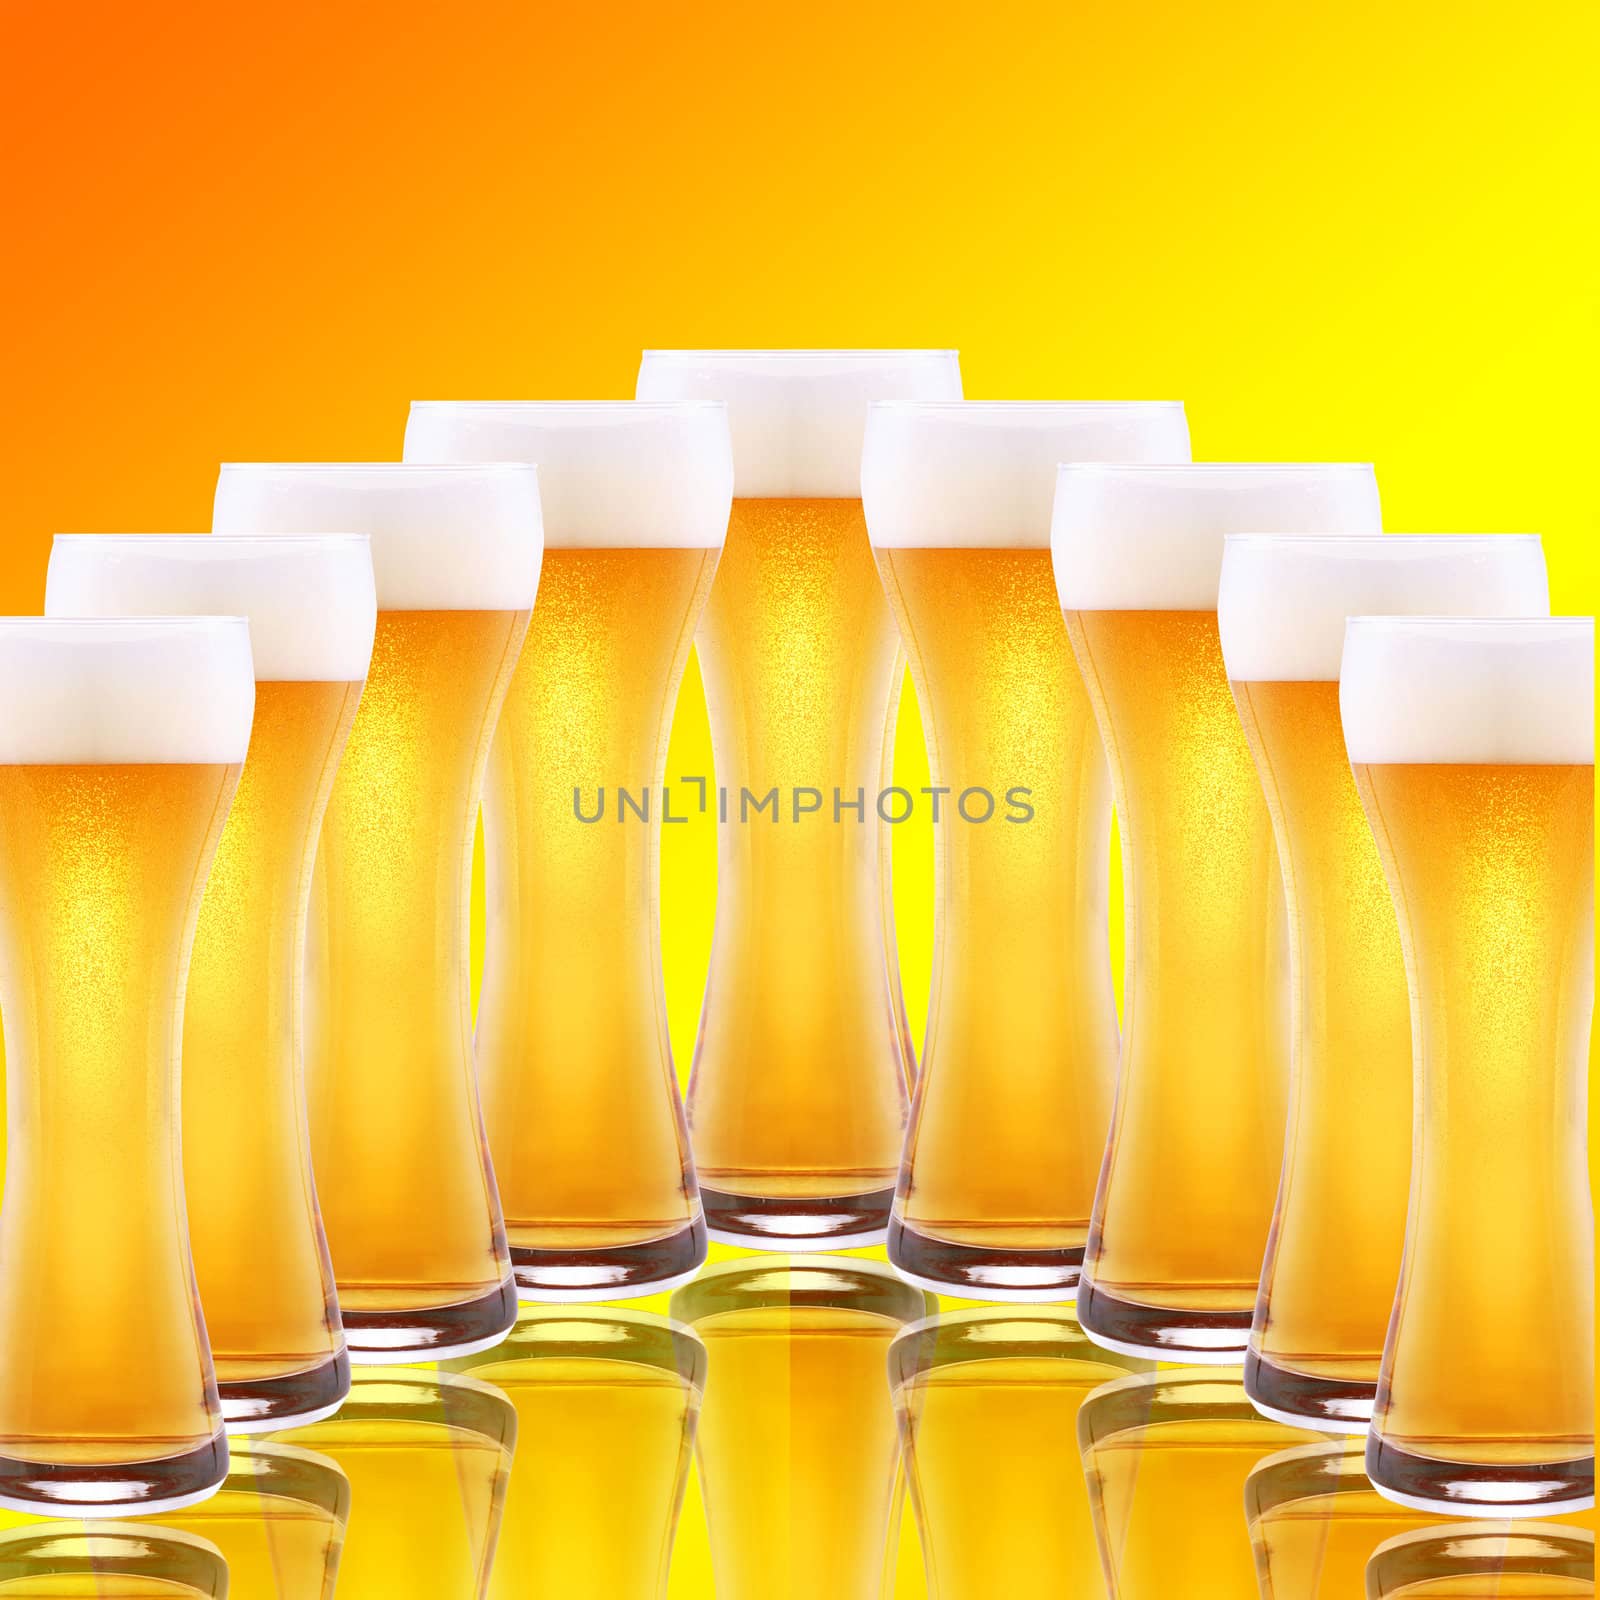 A row of beer pints by ozaiachin